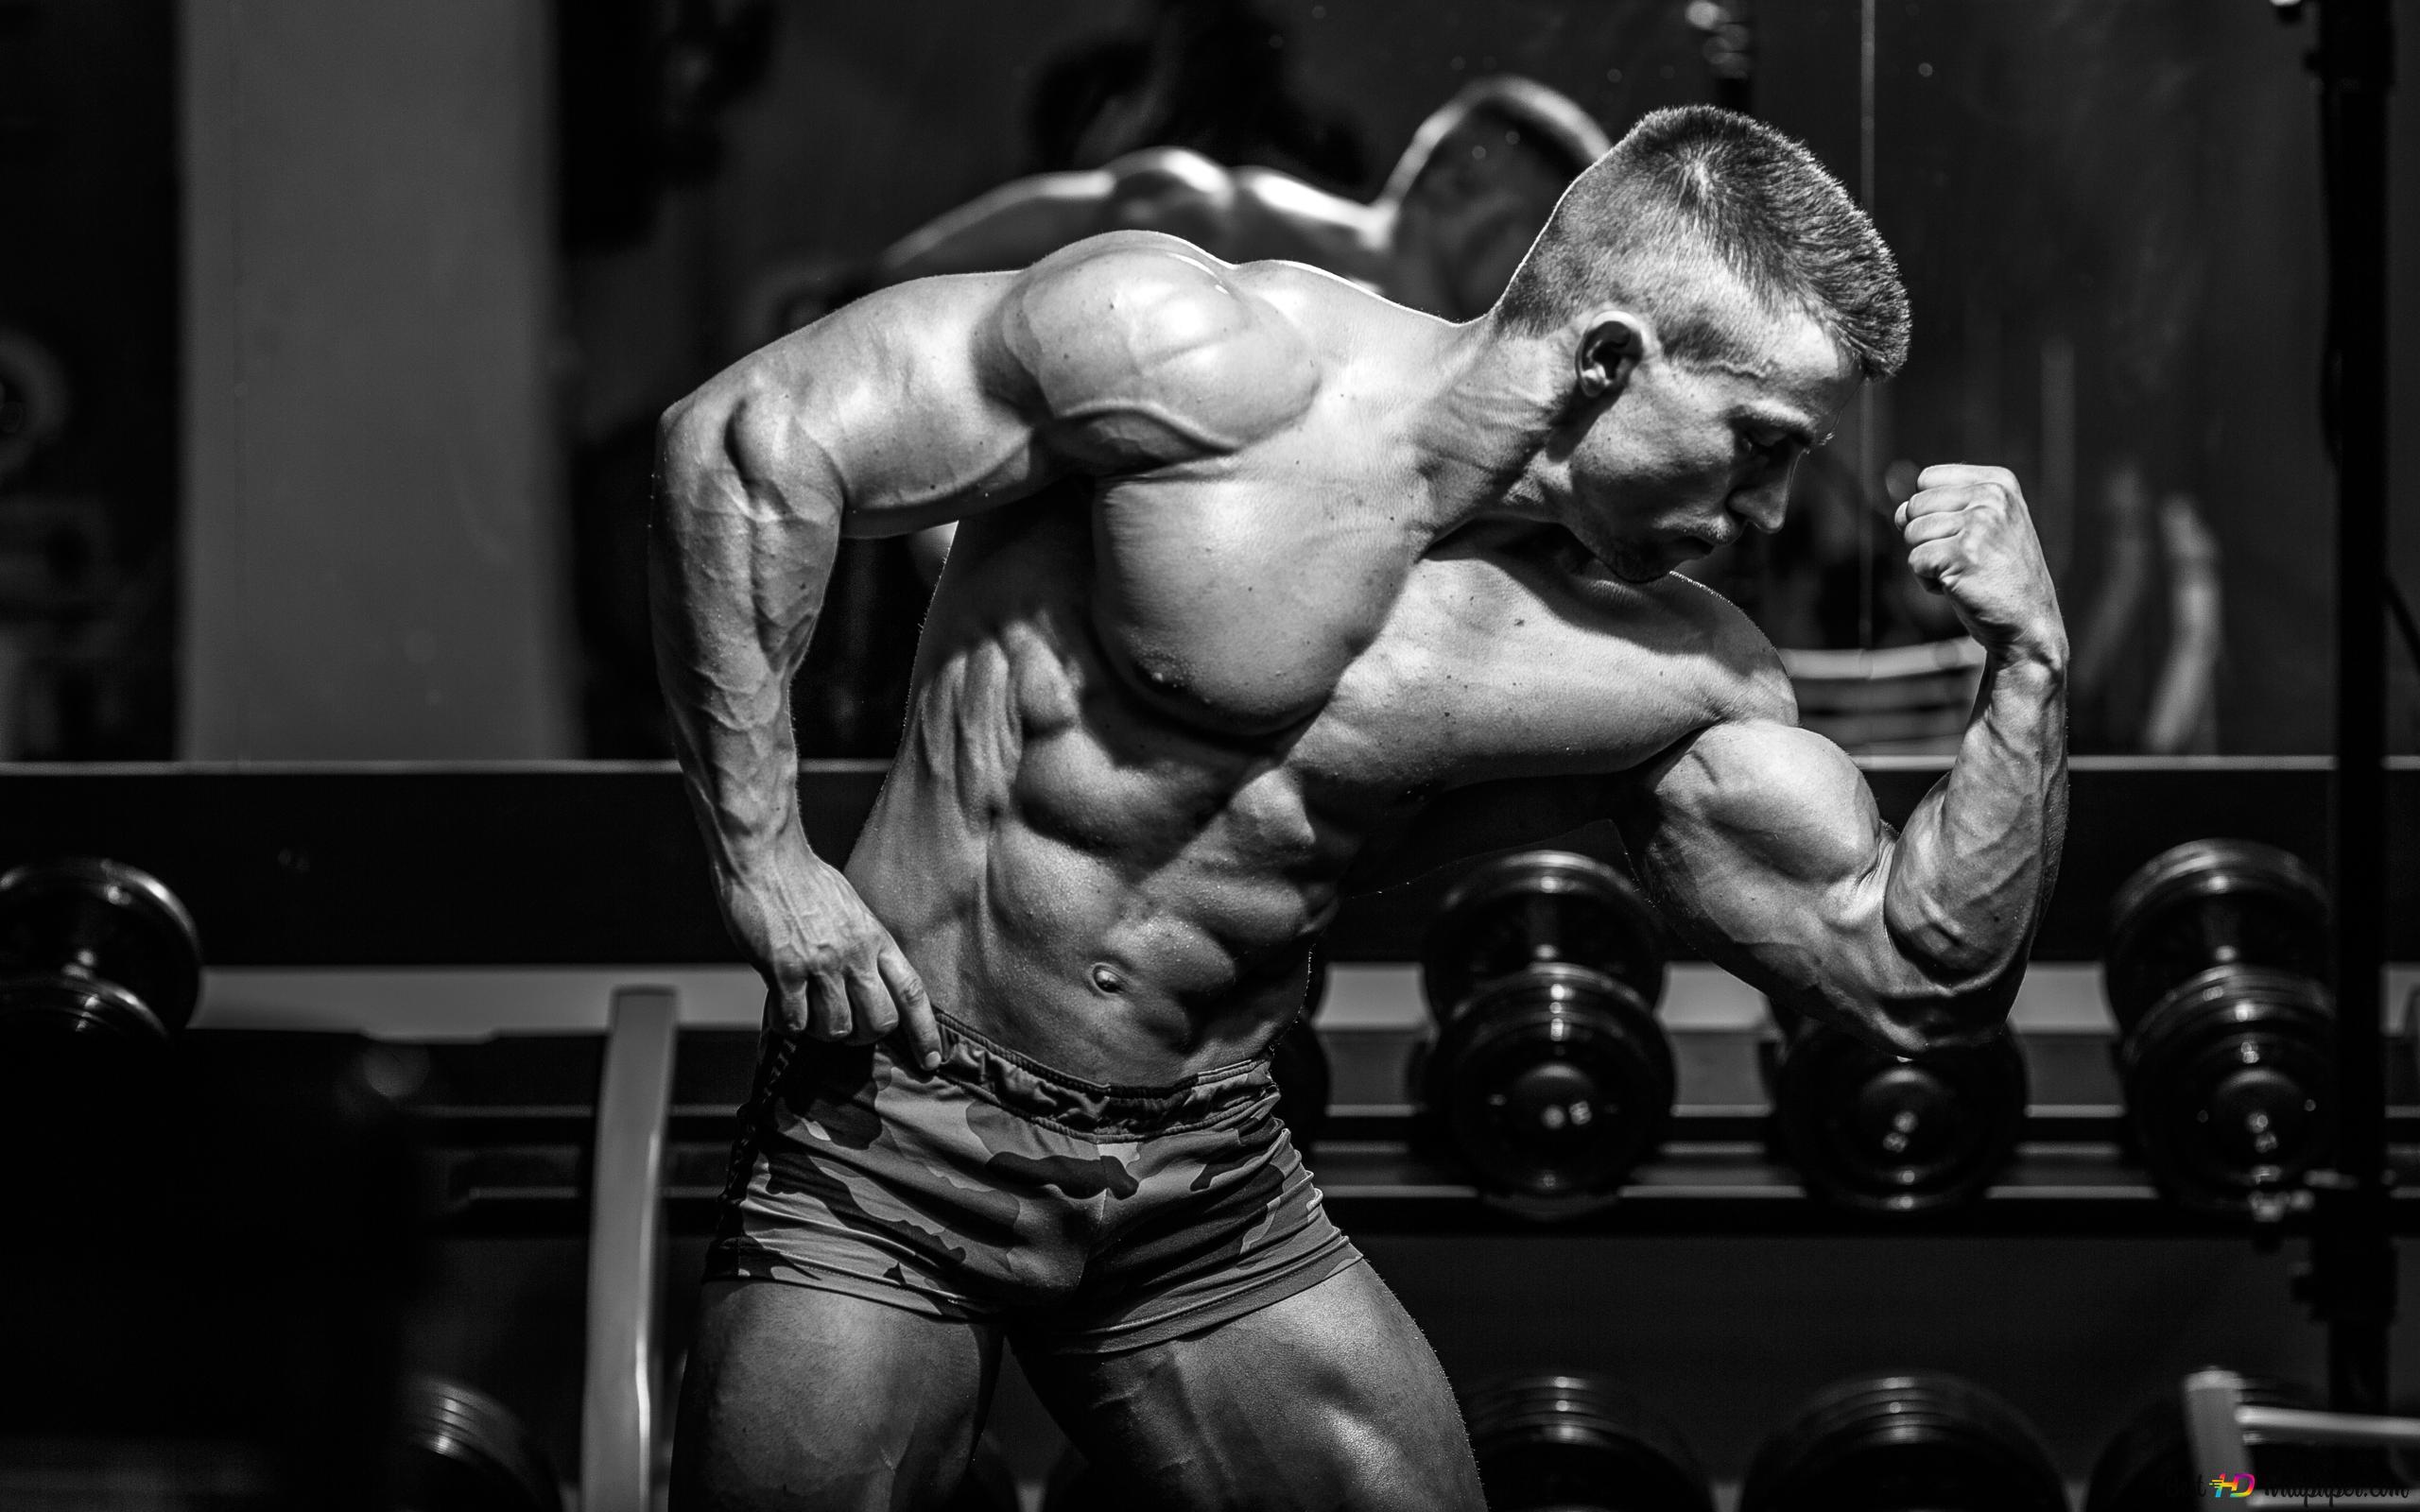 Gym bodybuilder showing off his muscles black and white photo 4K wallpaper download